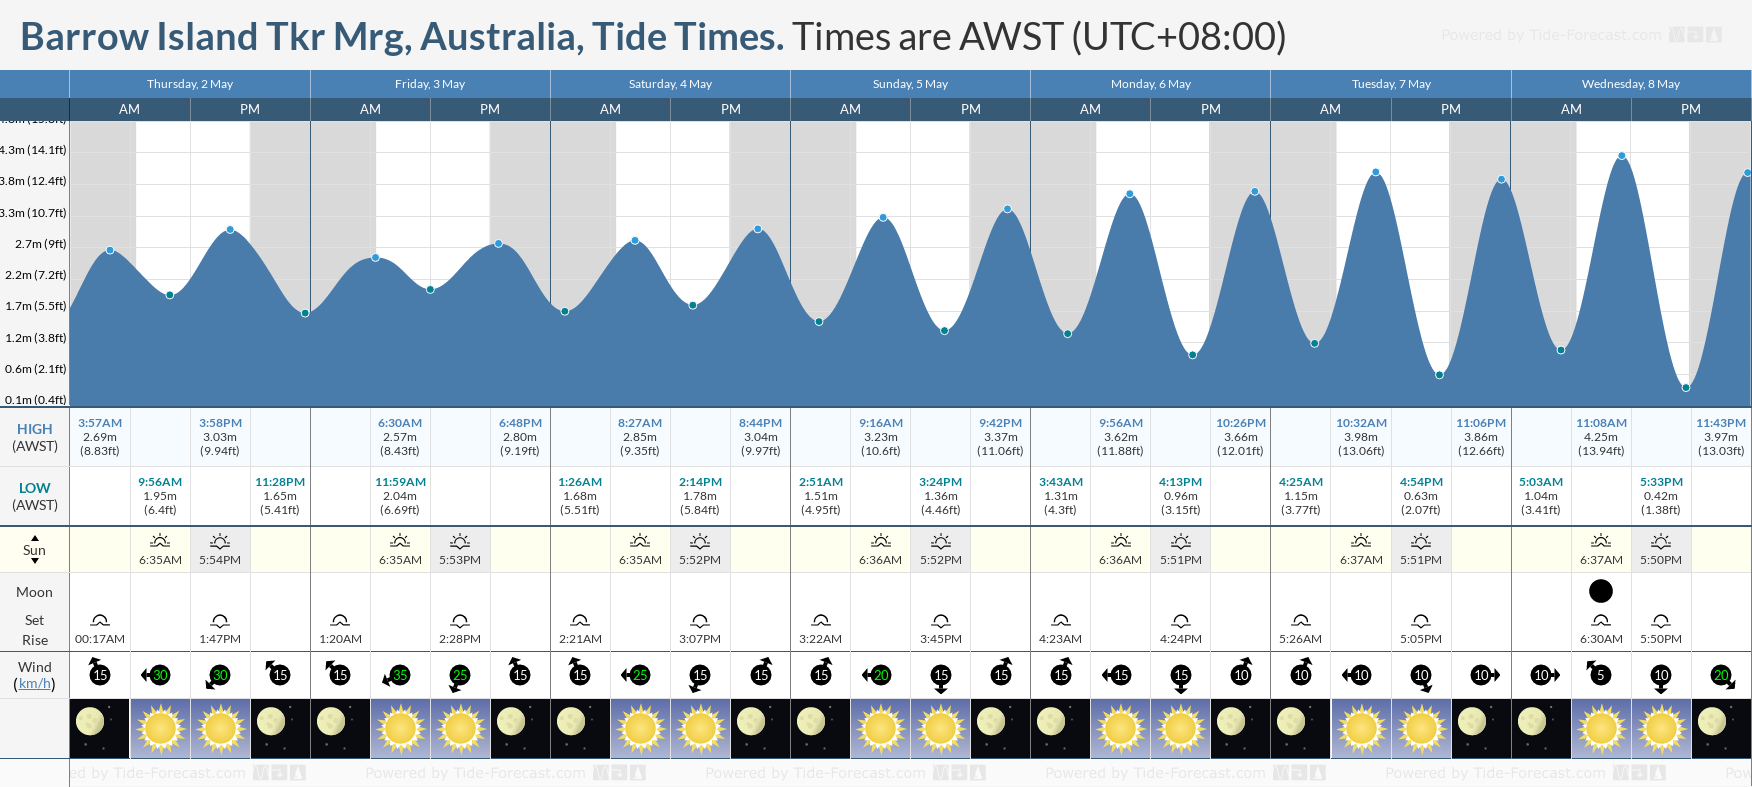 Barrow Island Tkr Mrg, Australia Tide Chart including high and low tide times for the next 7 days